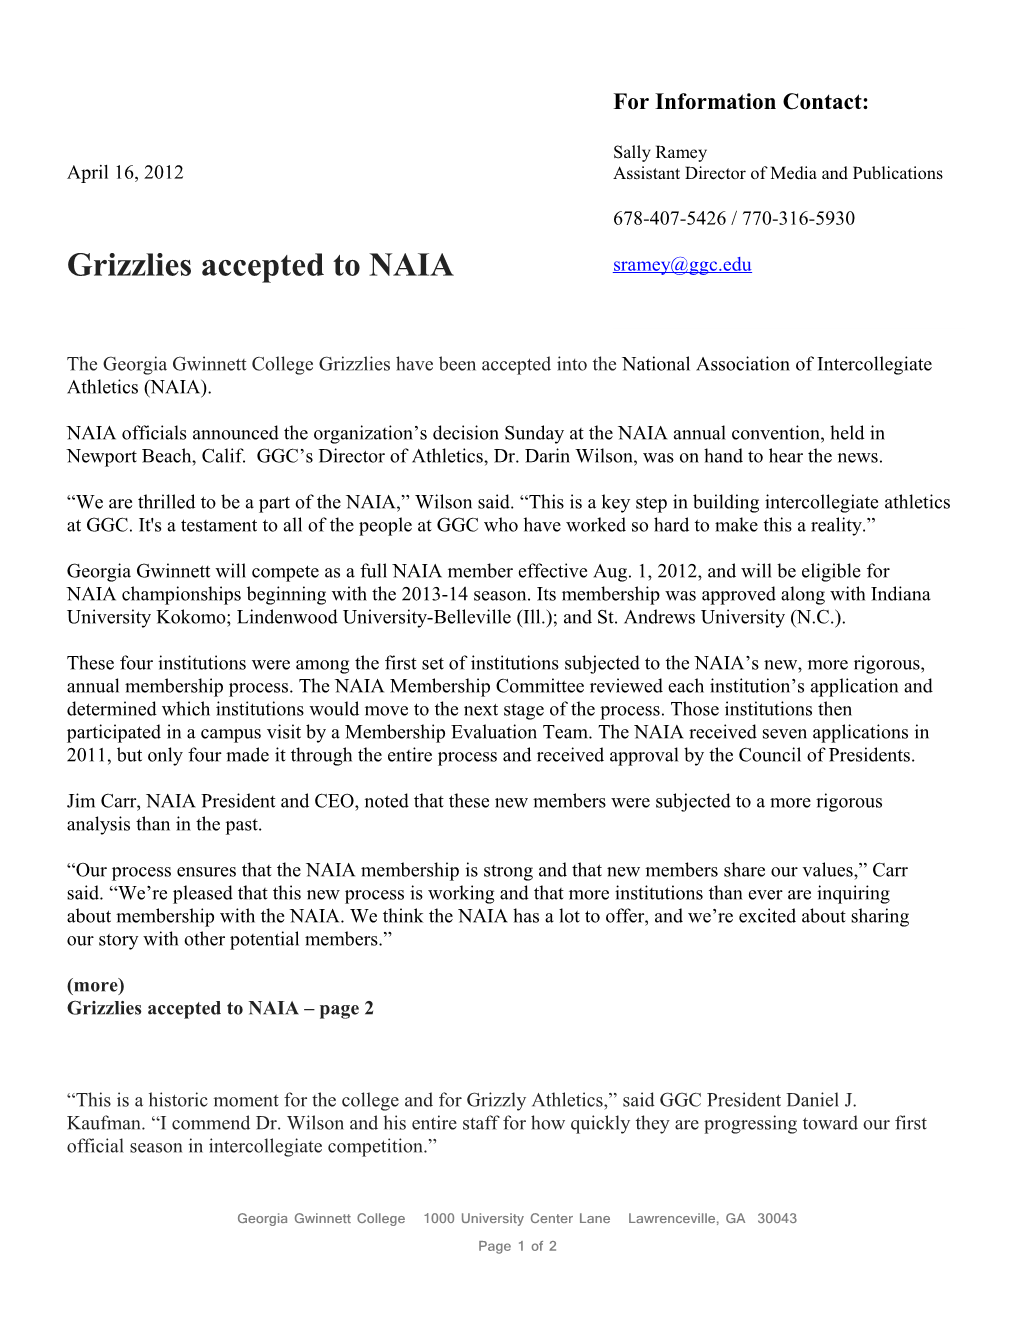 Grizzliesaccepted to NAIA